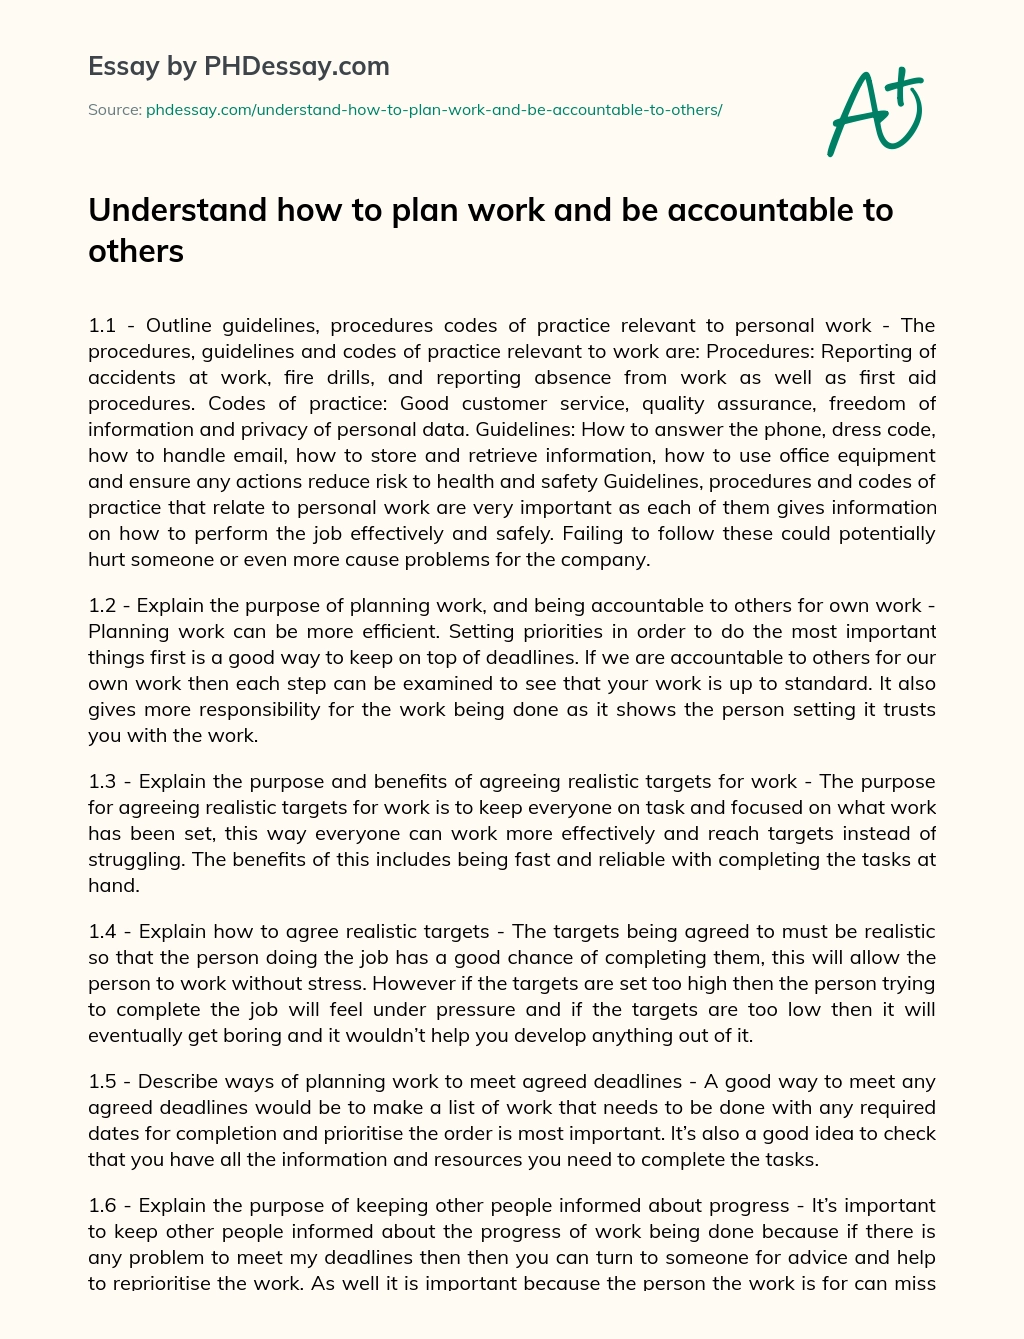 Understand how to plan work and be accountable to others essay